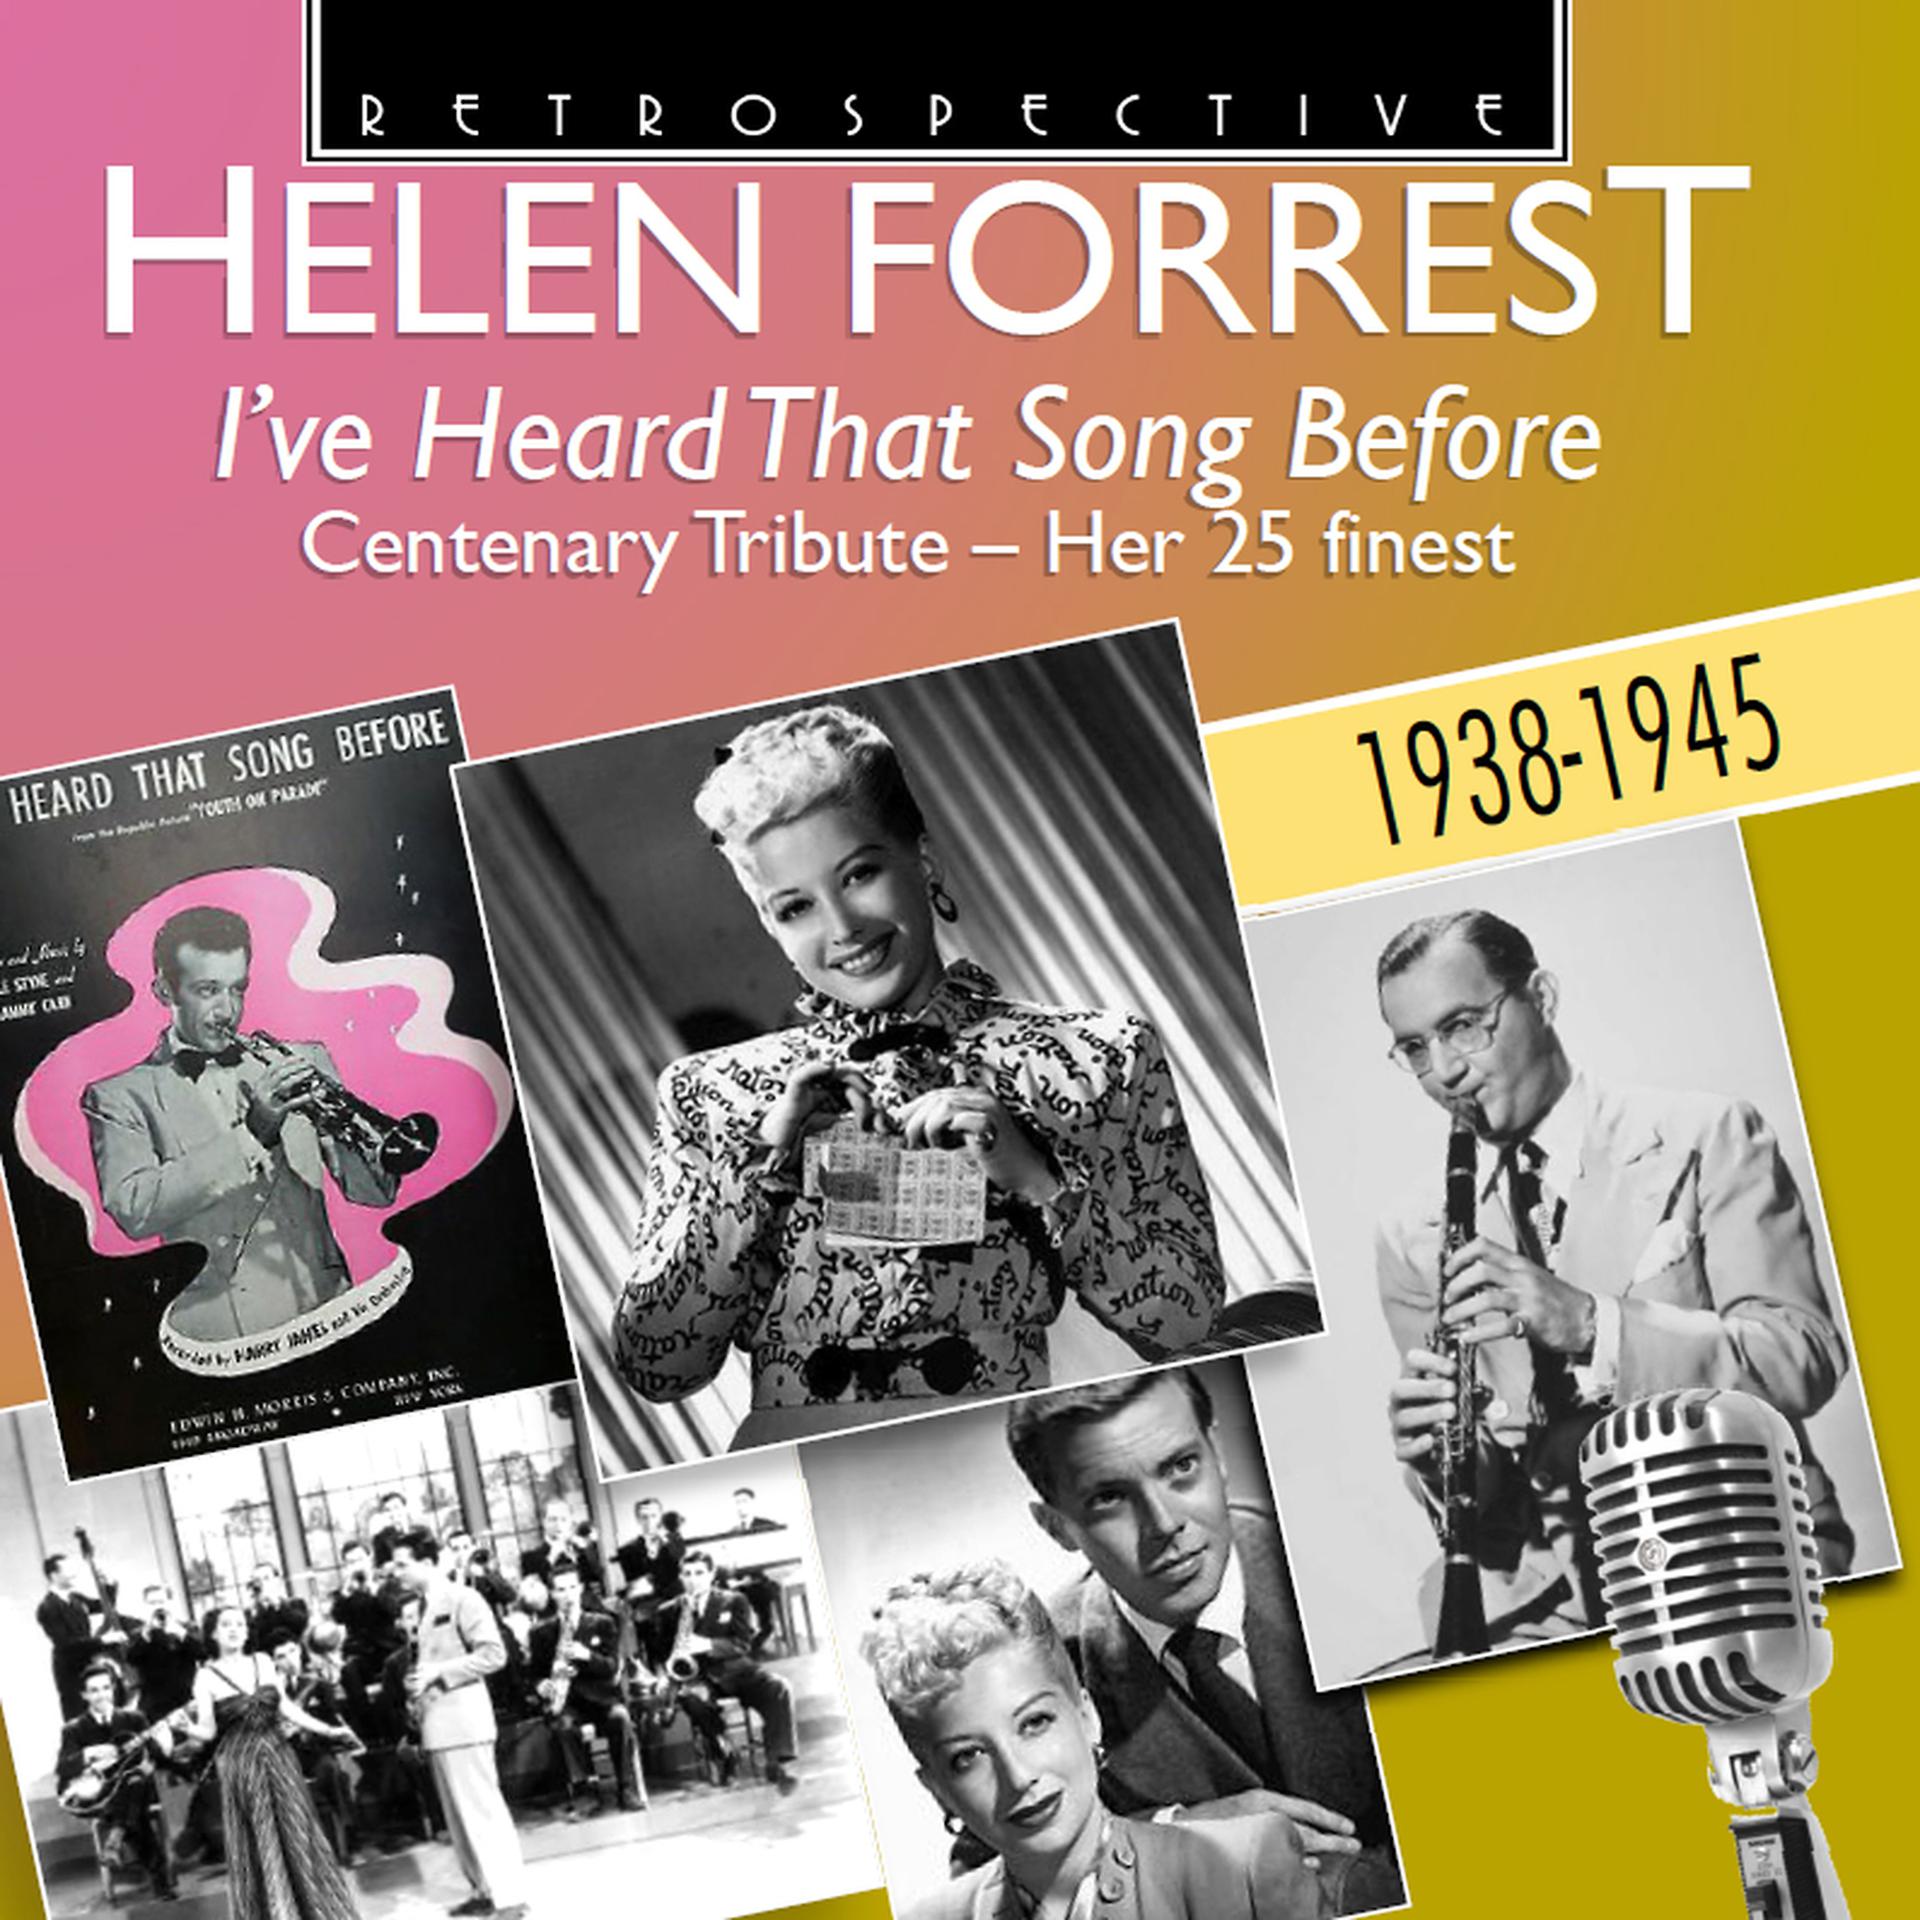 Постер альбома Helen Forrest: "I've Heard That Song Before" Centenary Tribute - Her 25 Finest